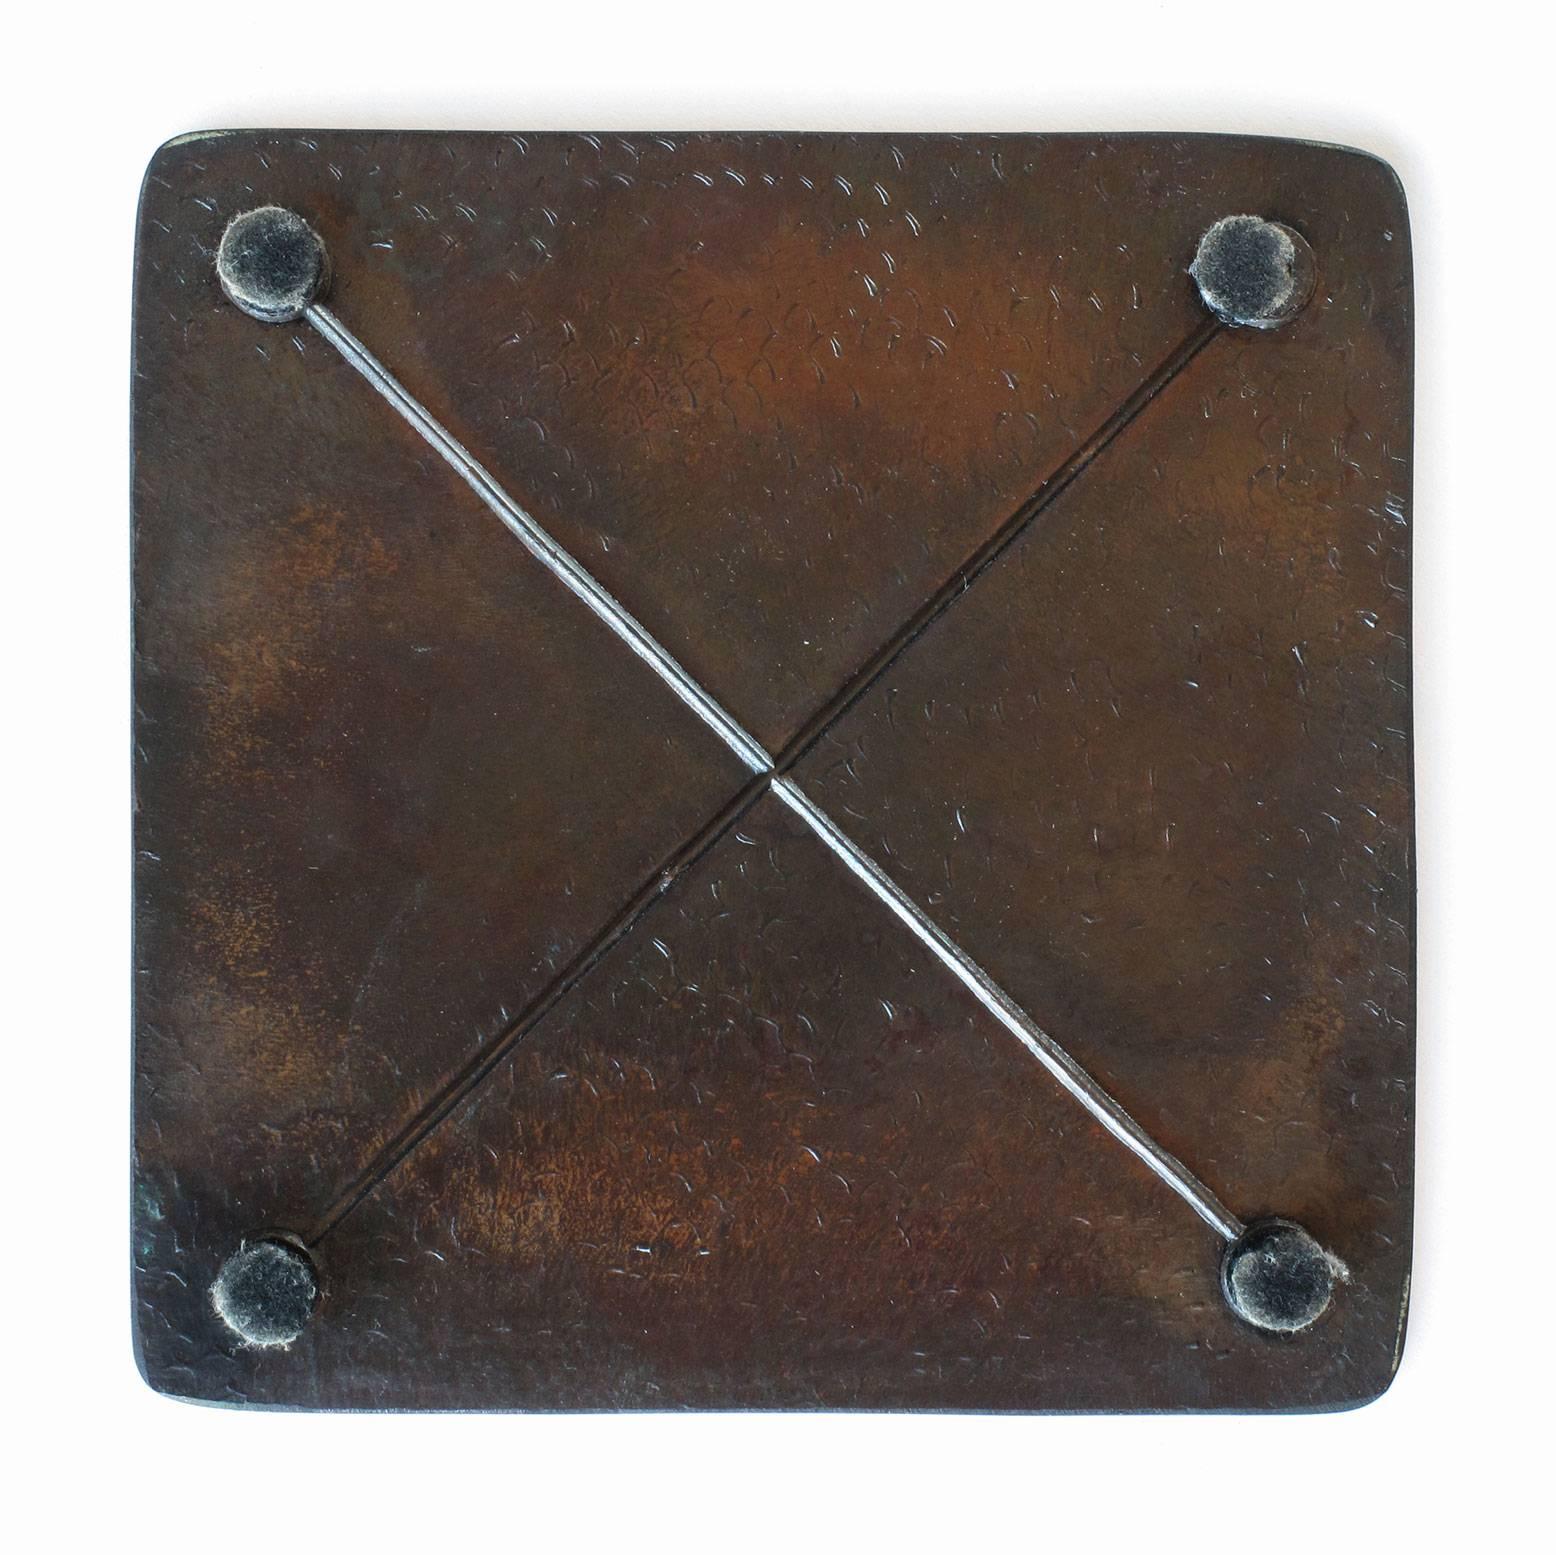 Ben Seibel Square Shaped Copper Tray with Concentric Squares Design Jenfred Ware For Sale 1